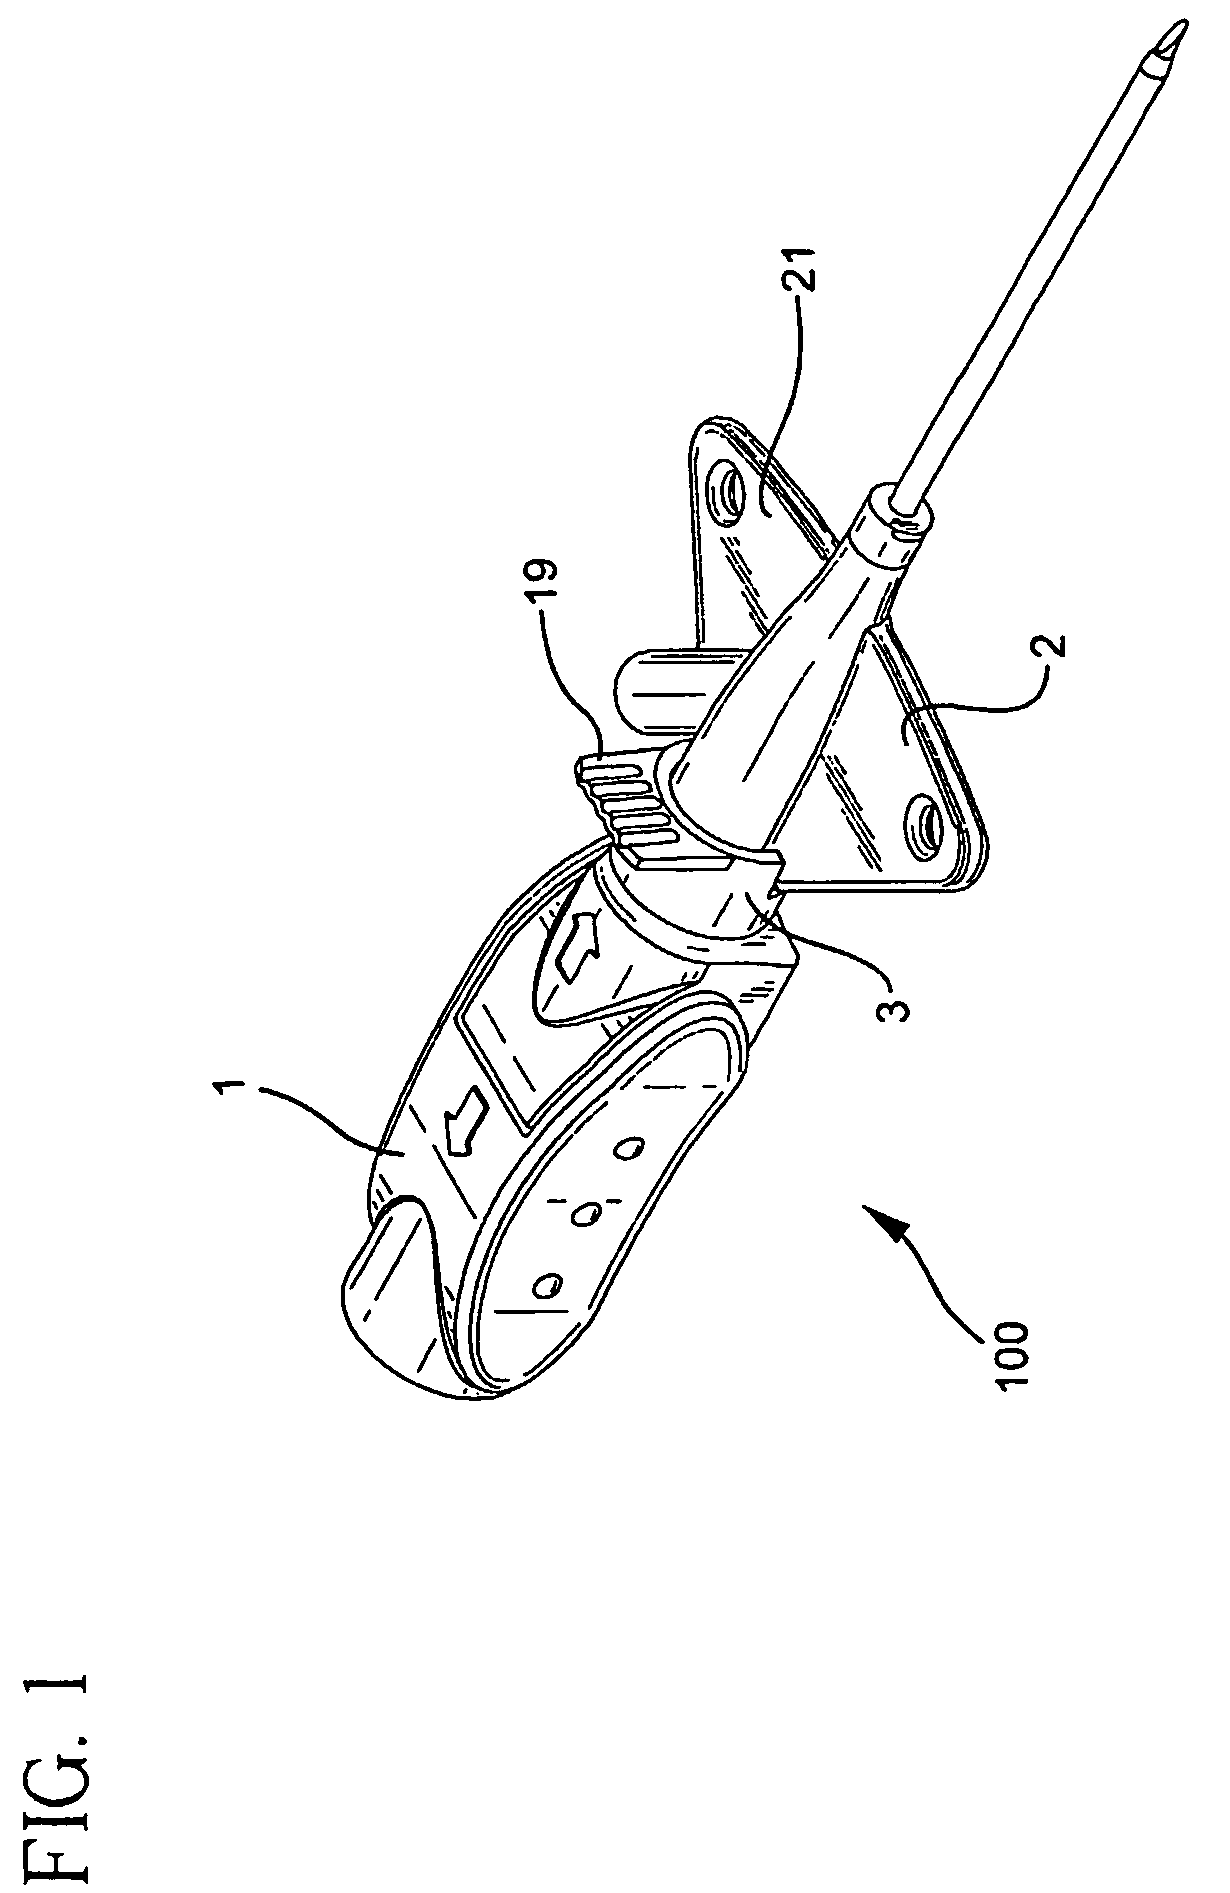 Method of forming IV catheter and needle assembly